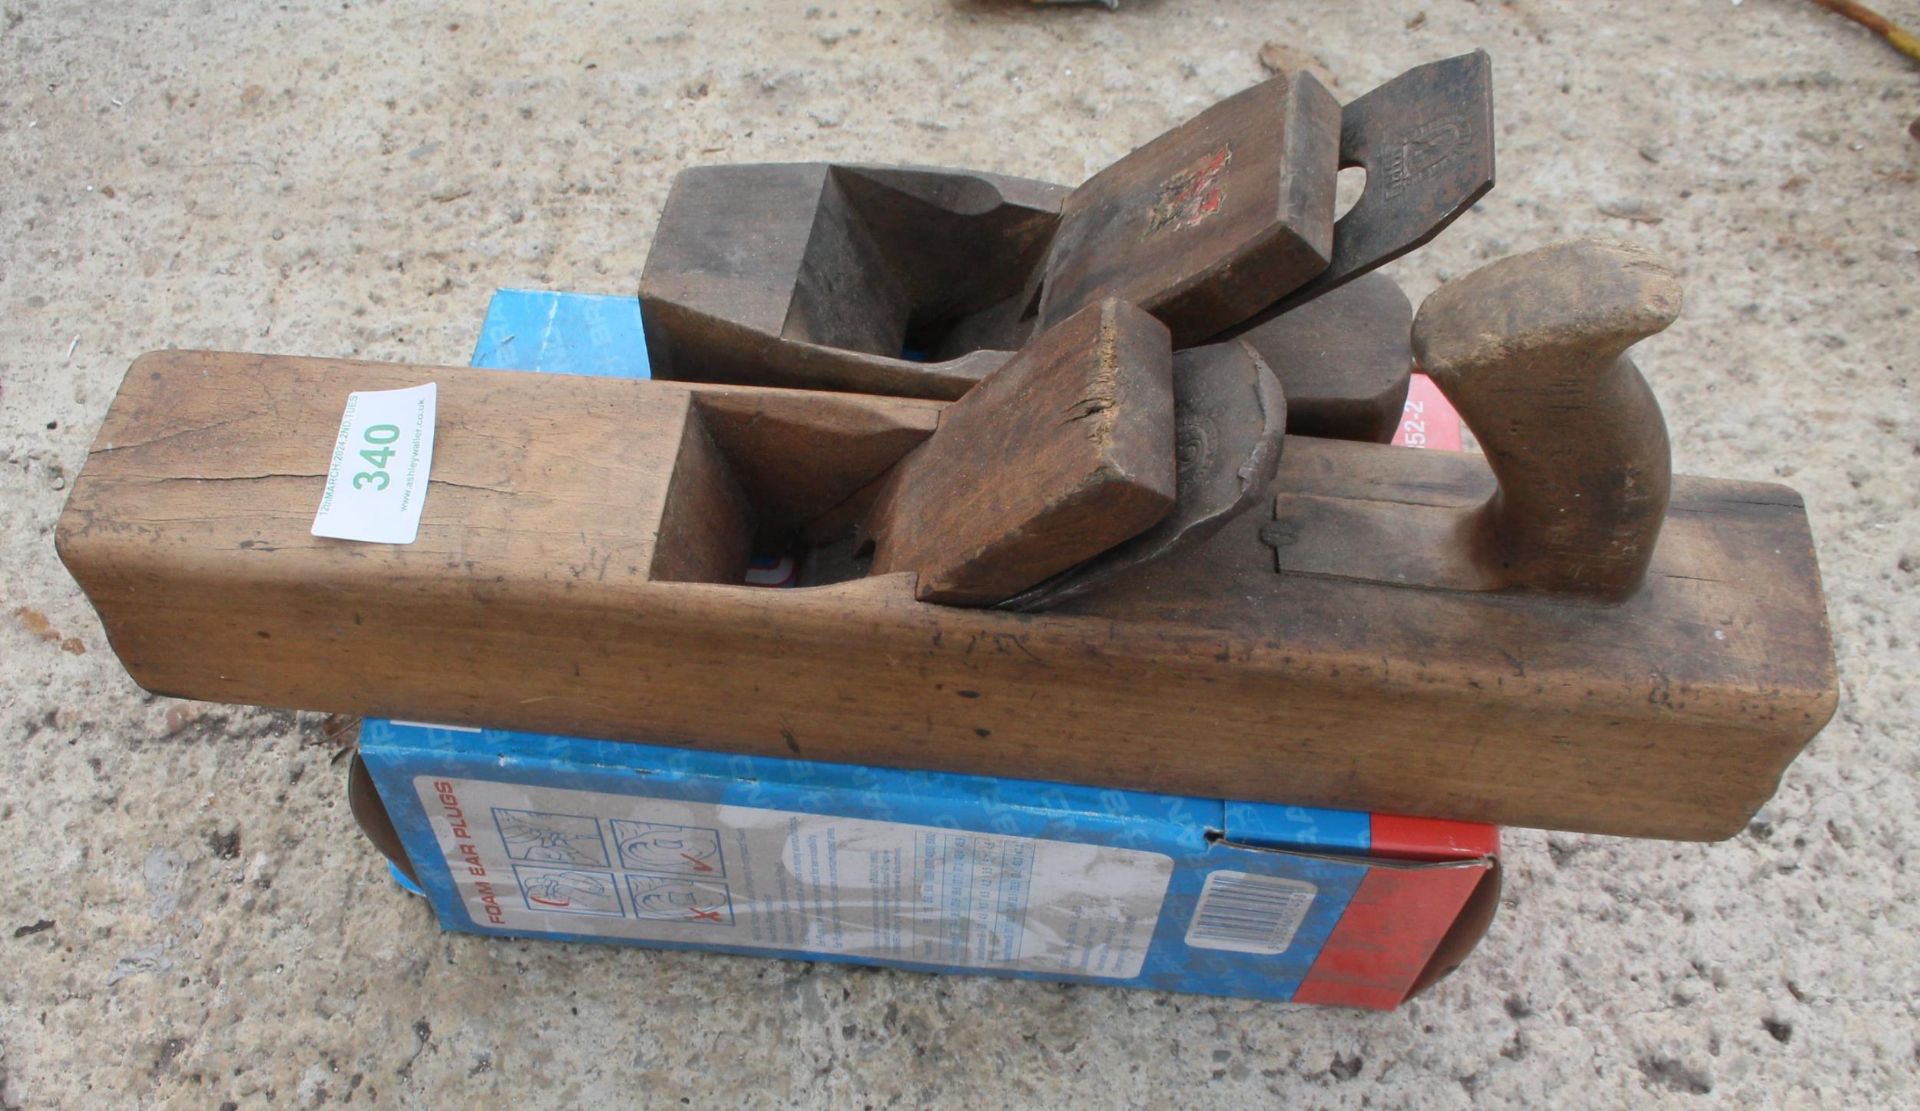 2 WOOD PLANES AND A BOX OF EAR PLUGS NO VAT - Image 2 of 3